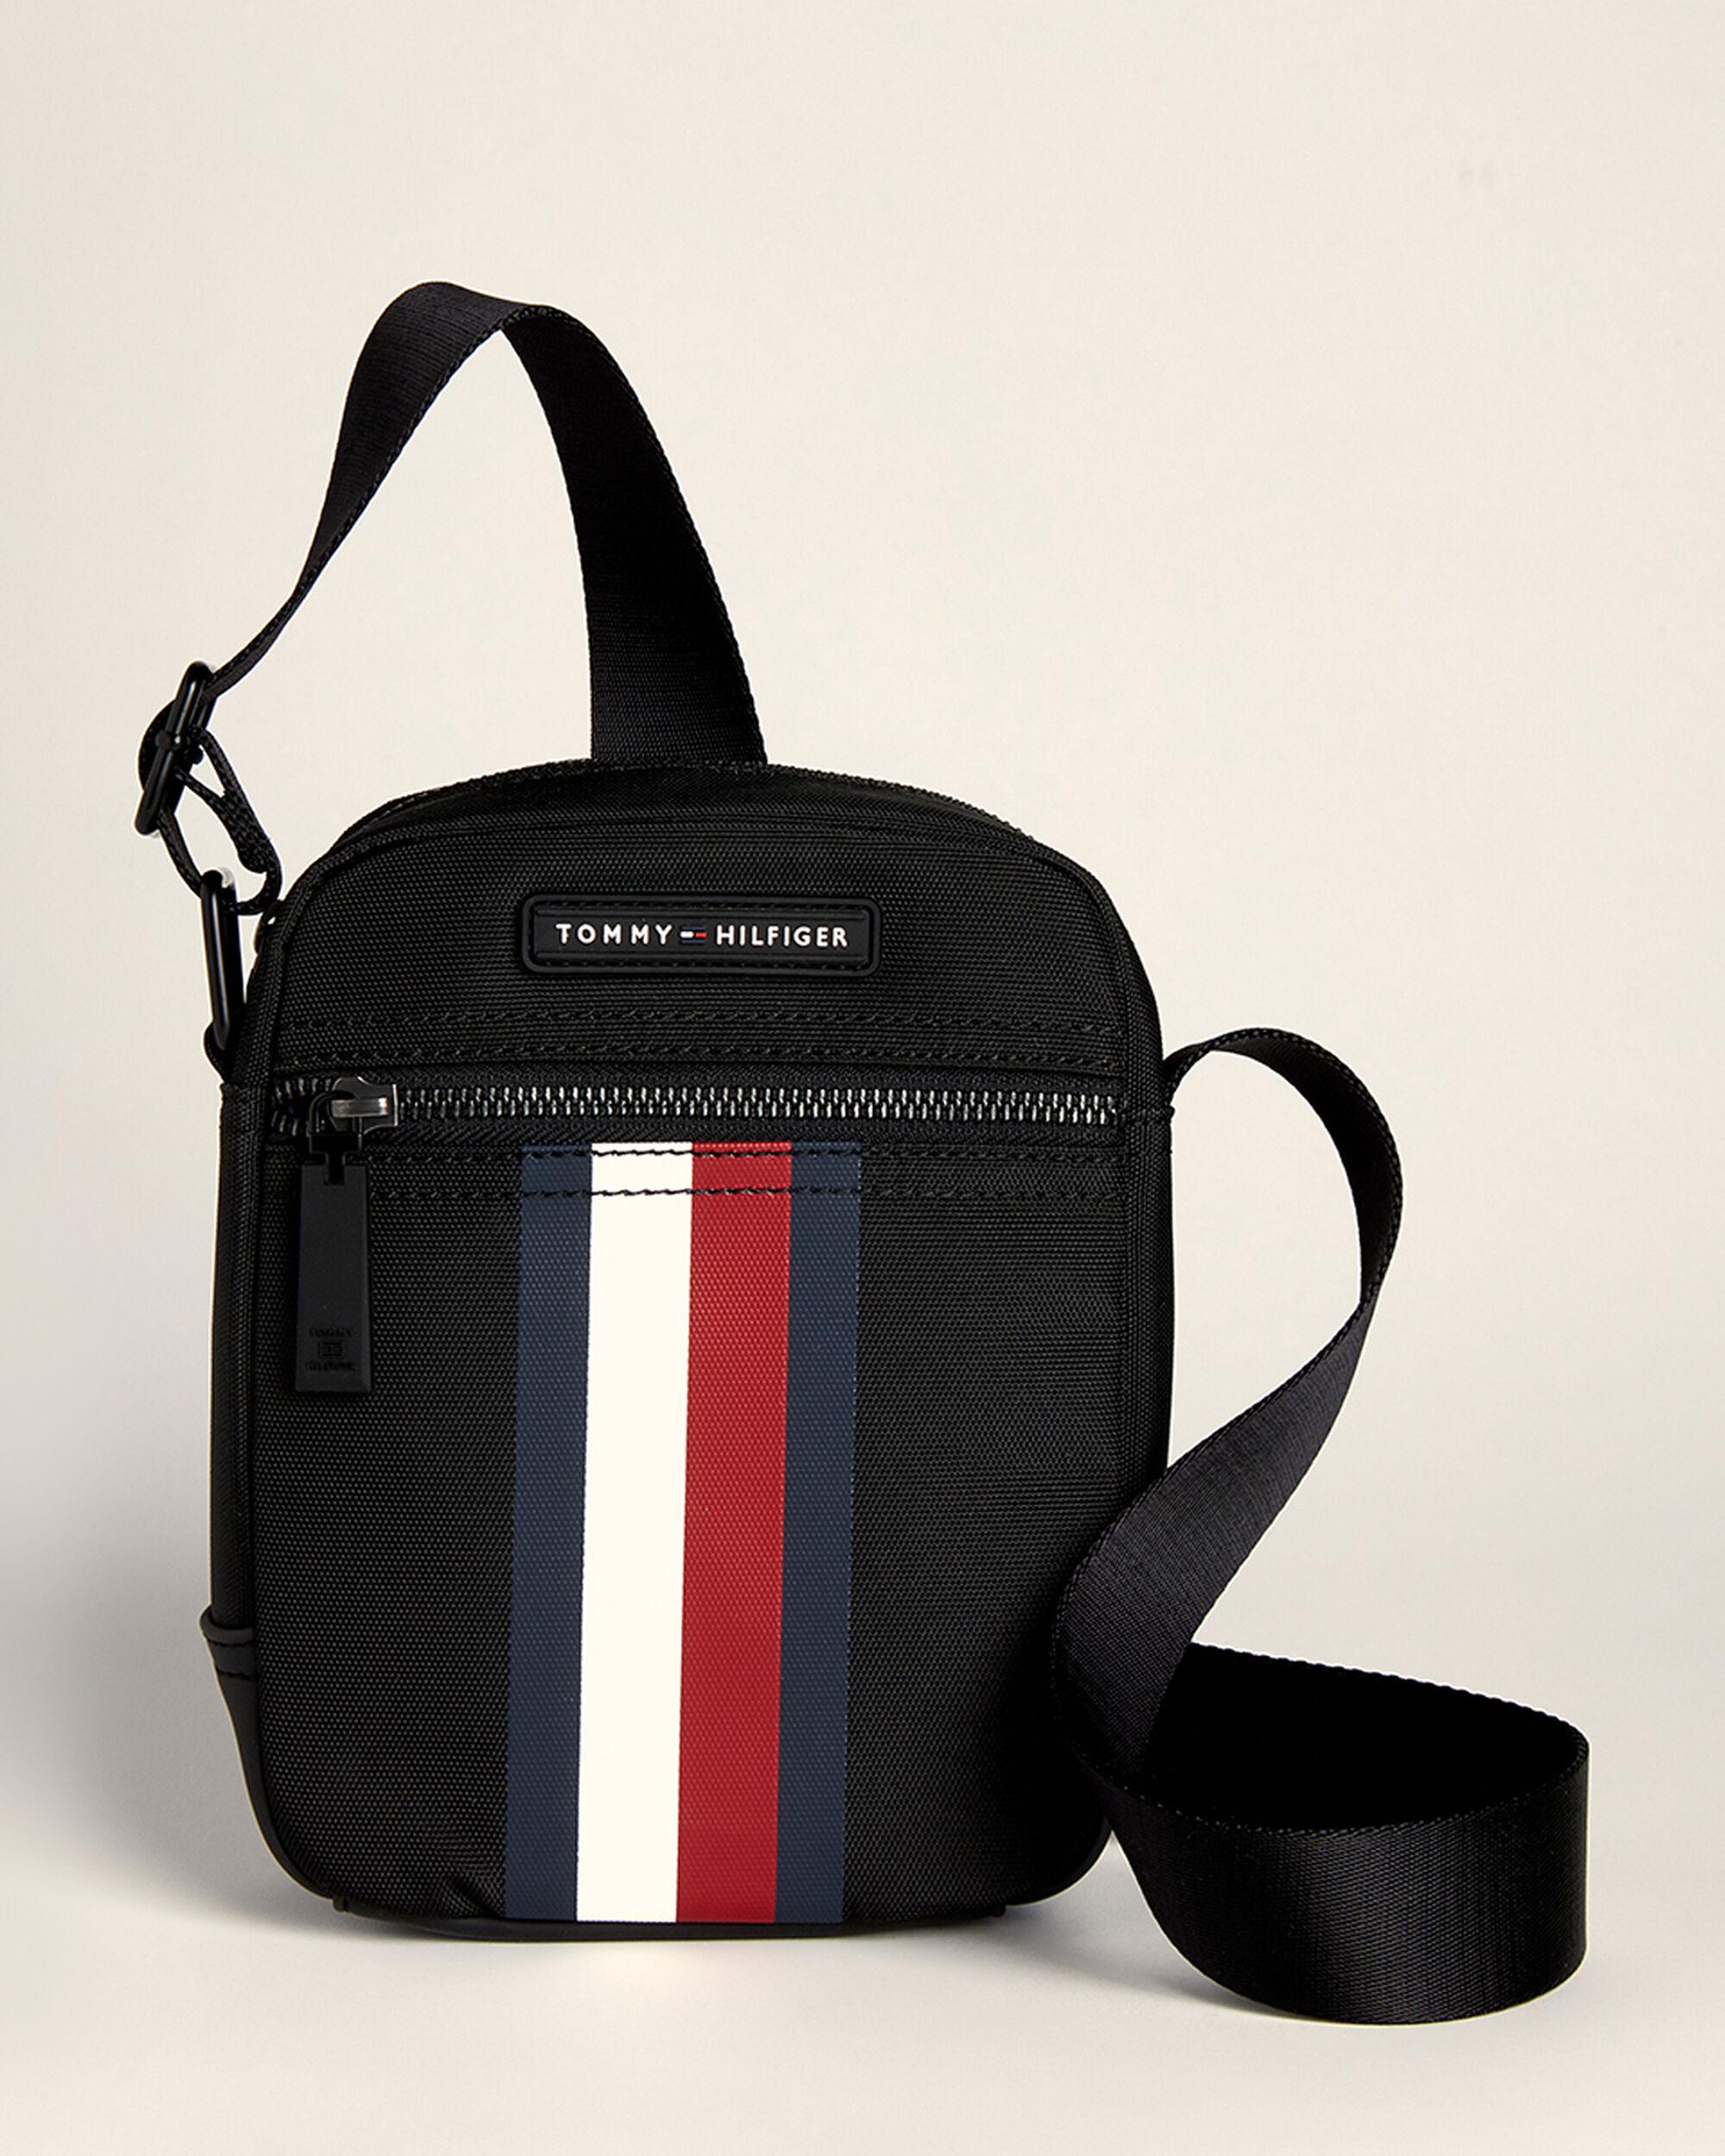 century 21 tommy hilfiger bags